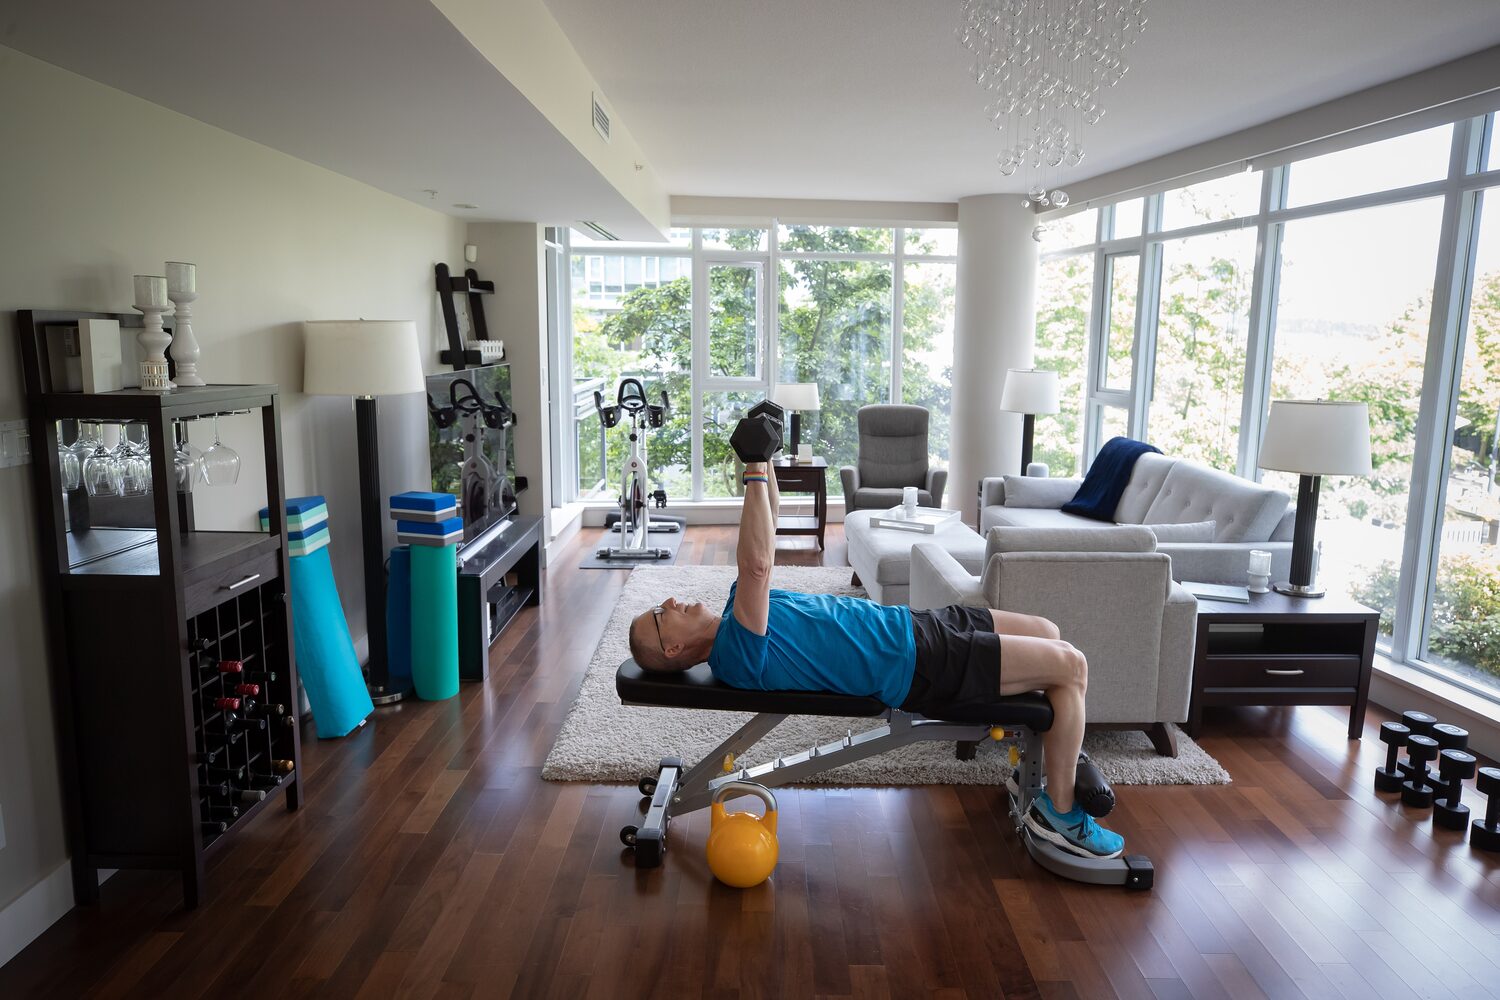 How to bulk up your home gym - The Globe and Mail